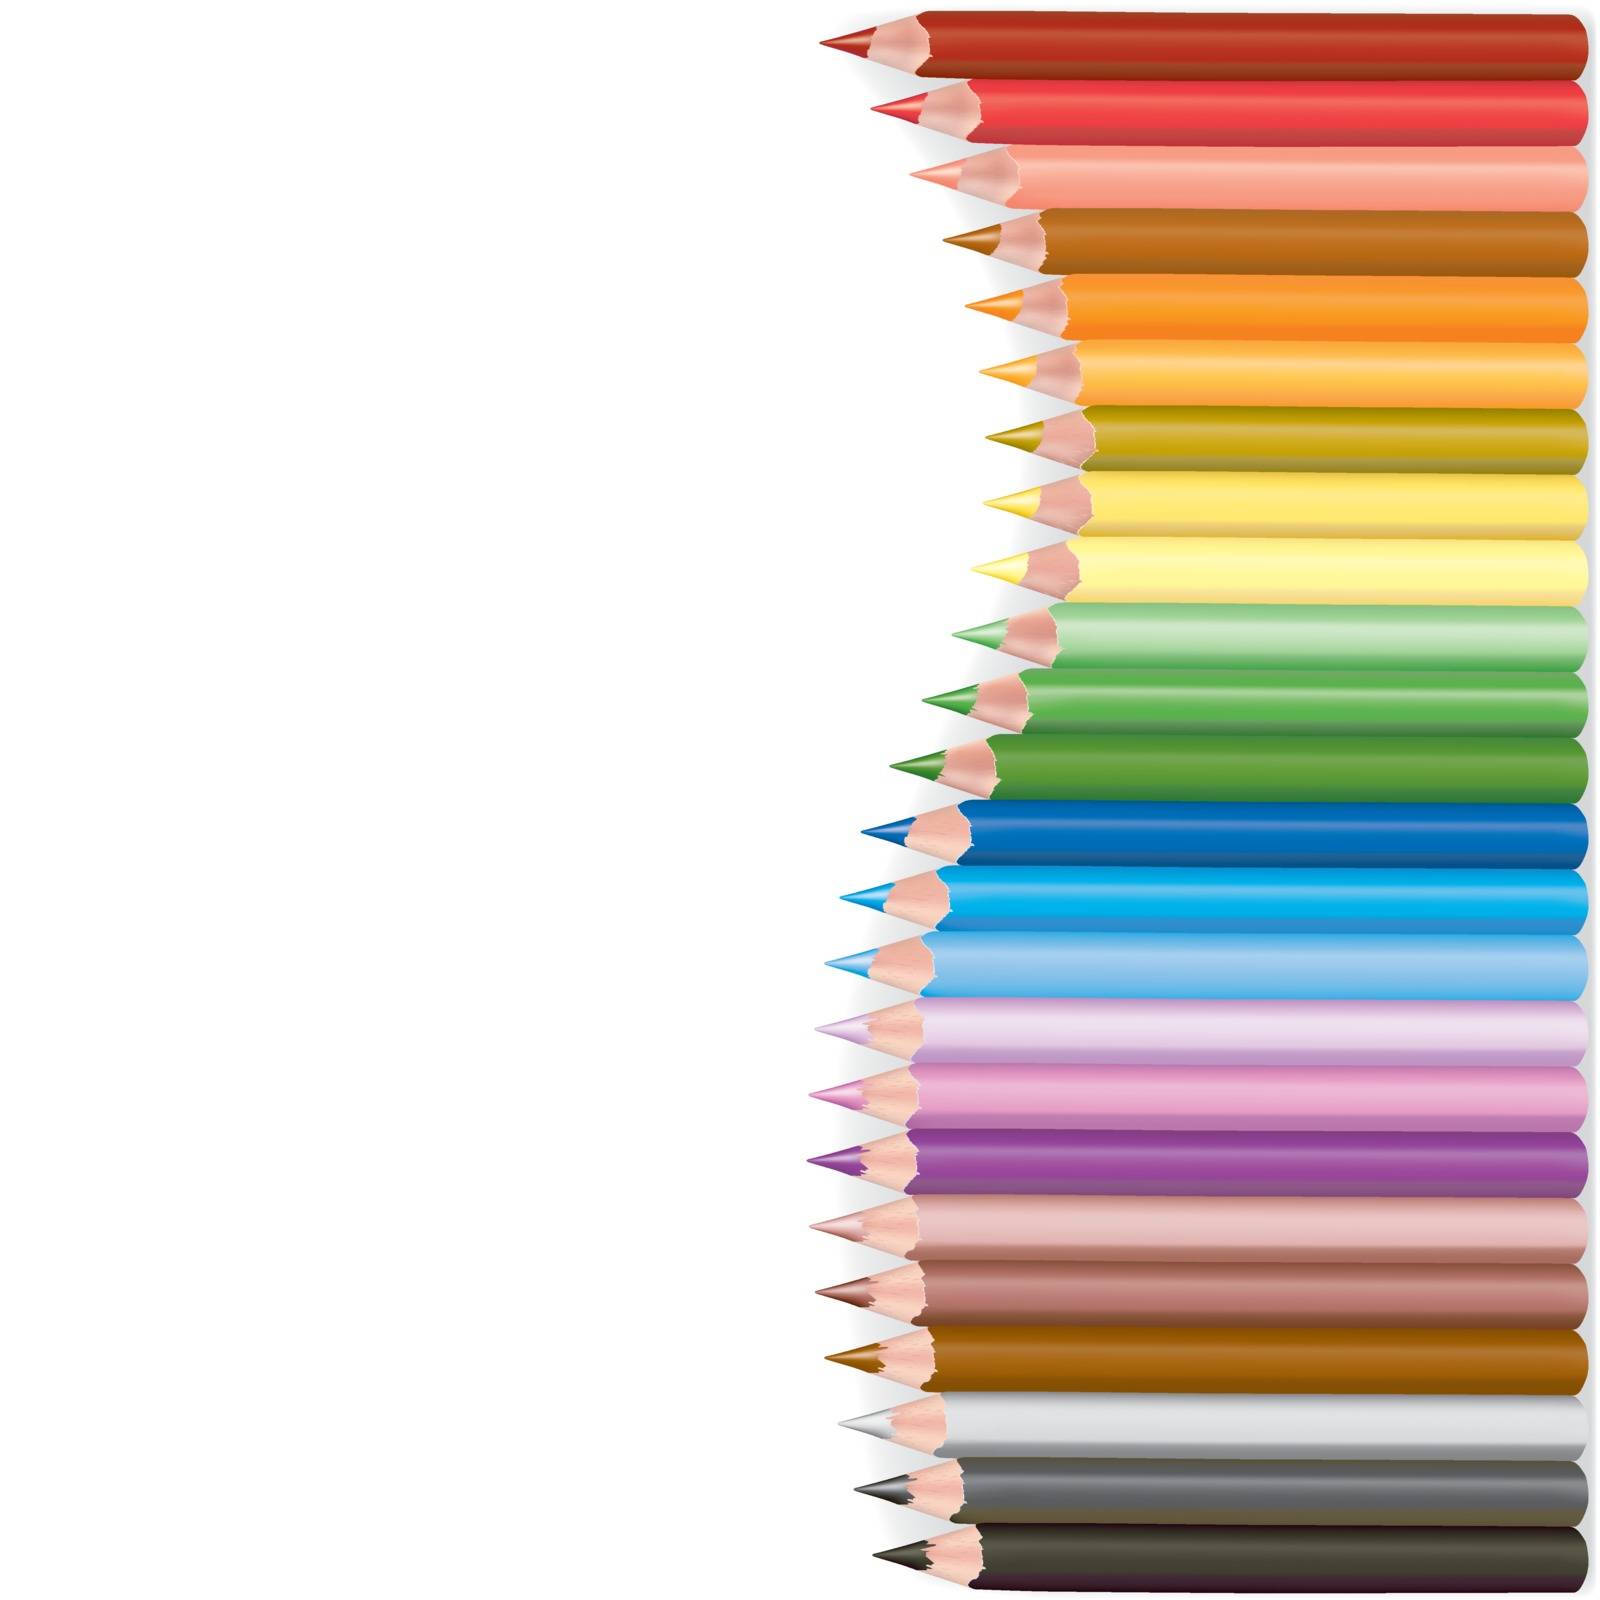 Crayons Wave Shape - Colored Illustration, Vector